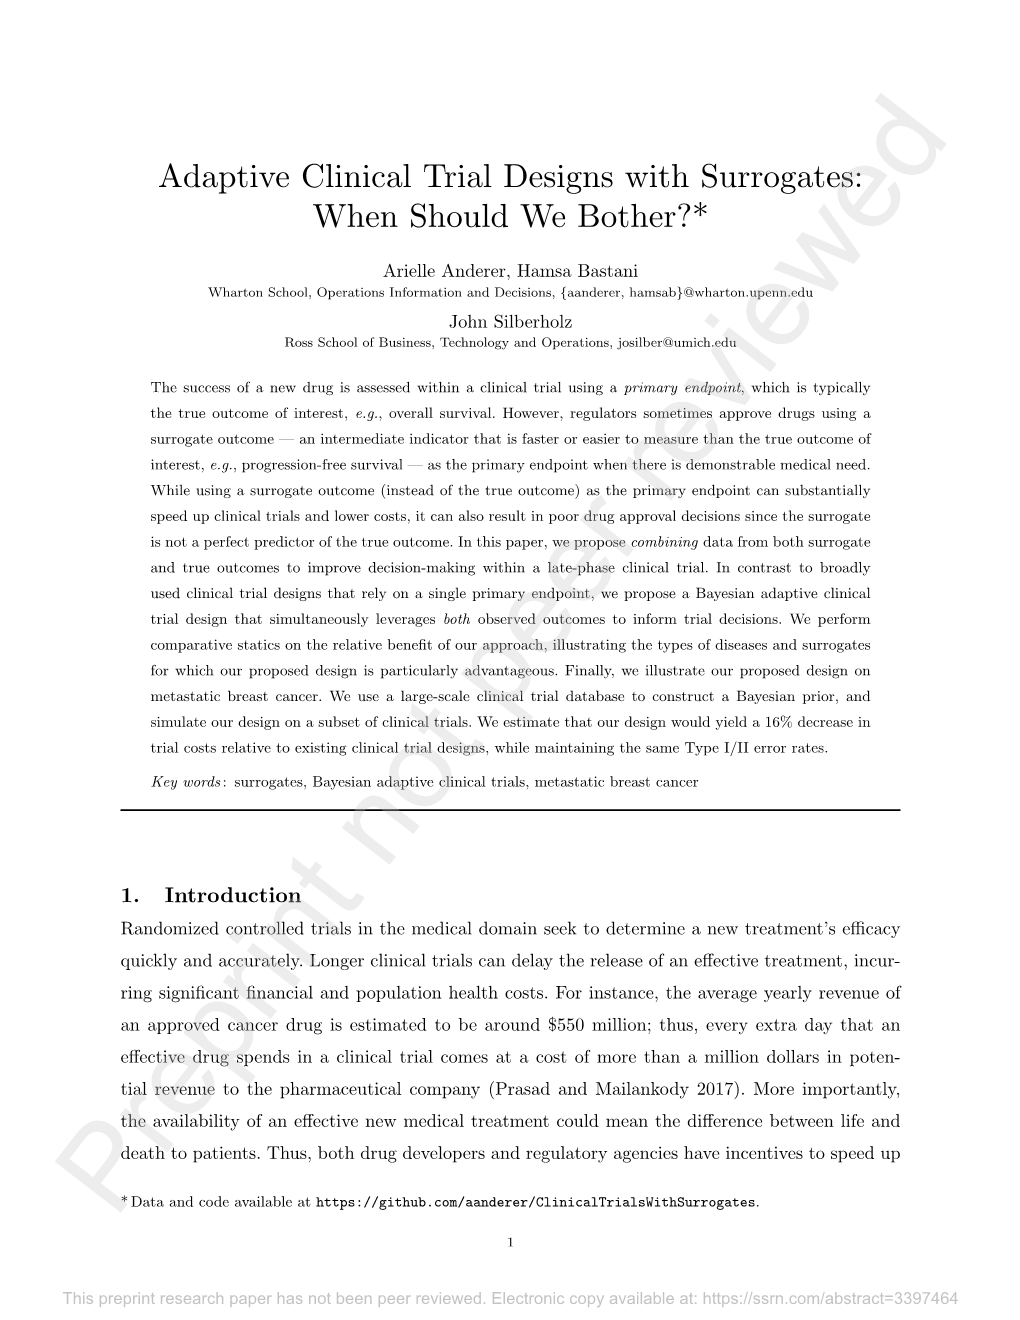 Adaptive Clinical Trial Designs with Surrogates: When Should We Bother?*